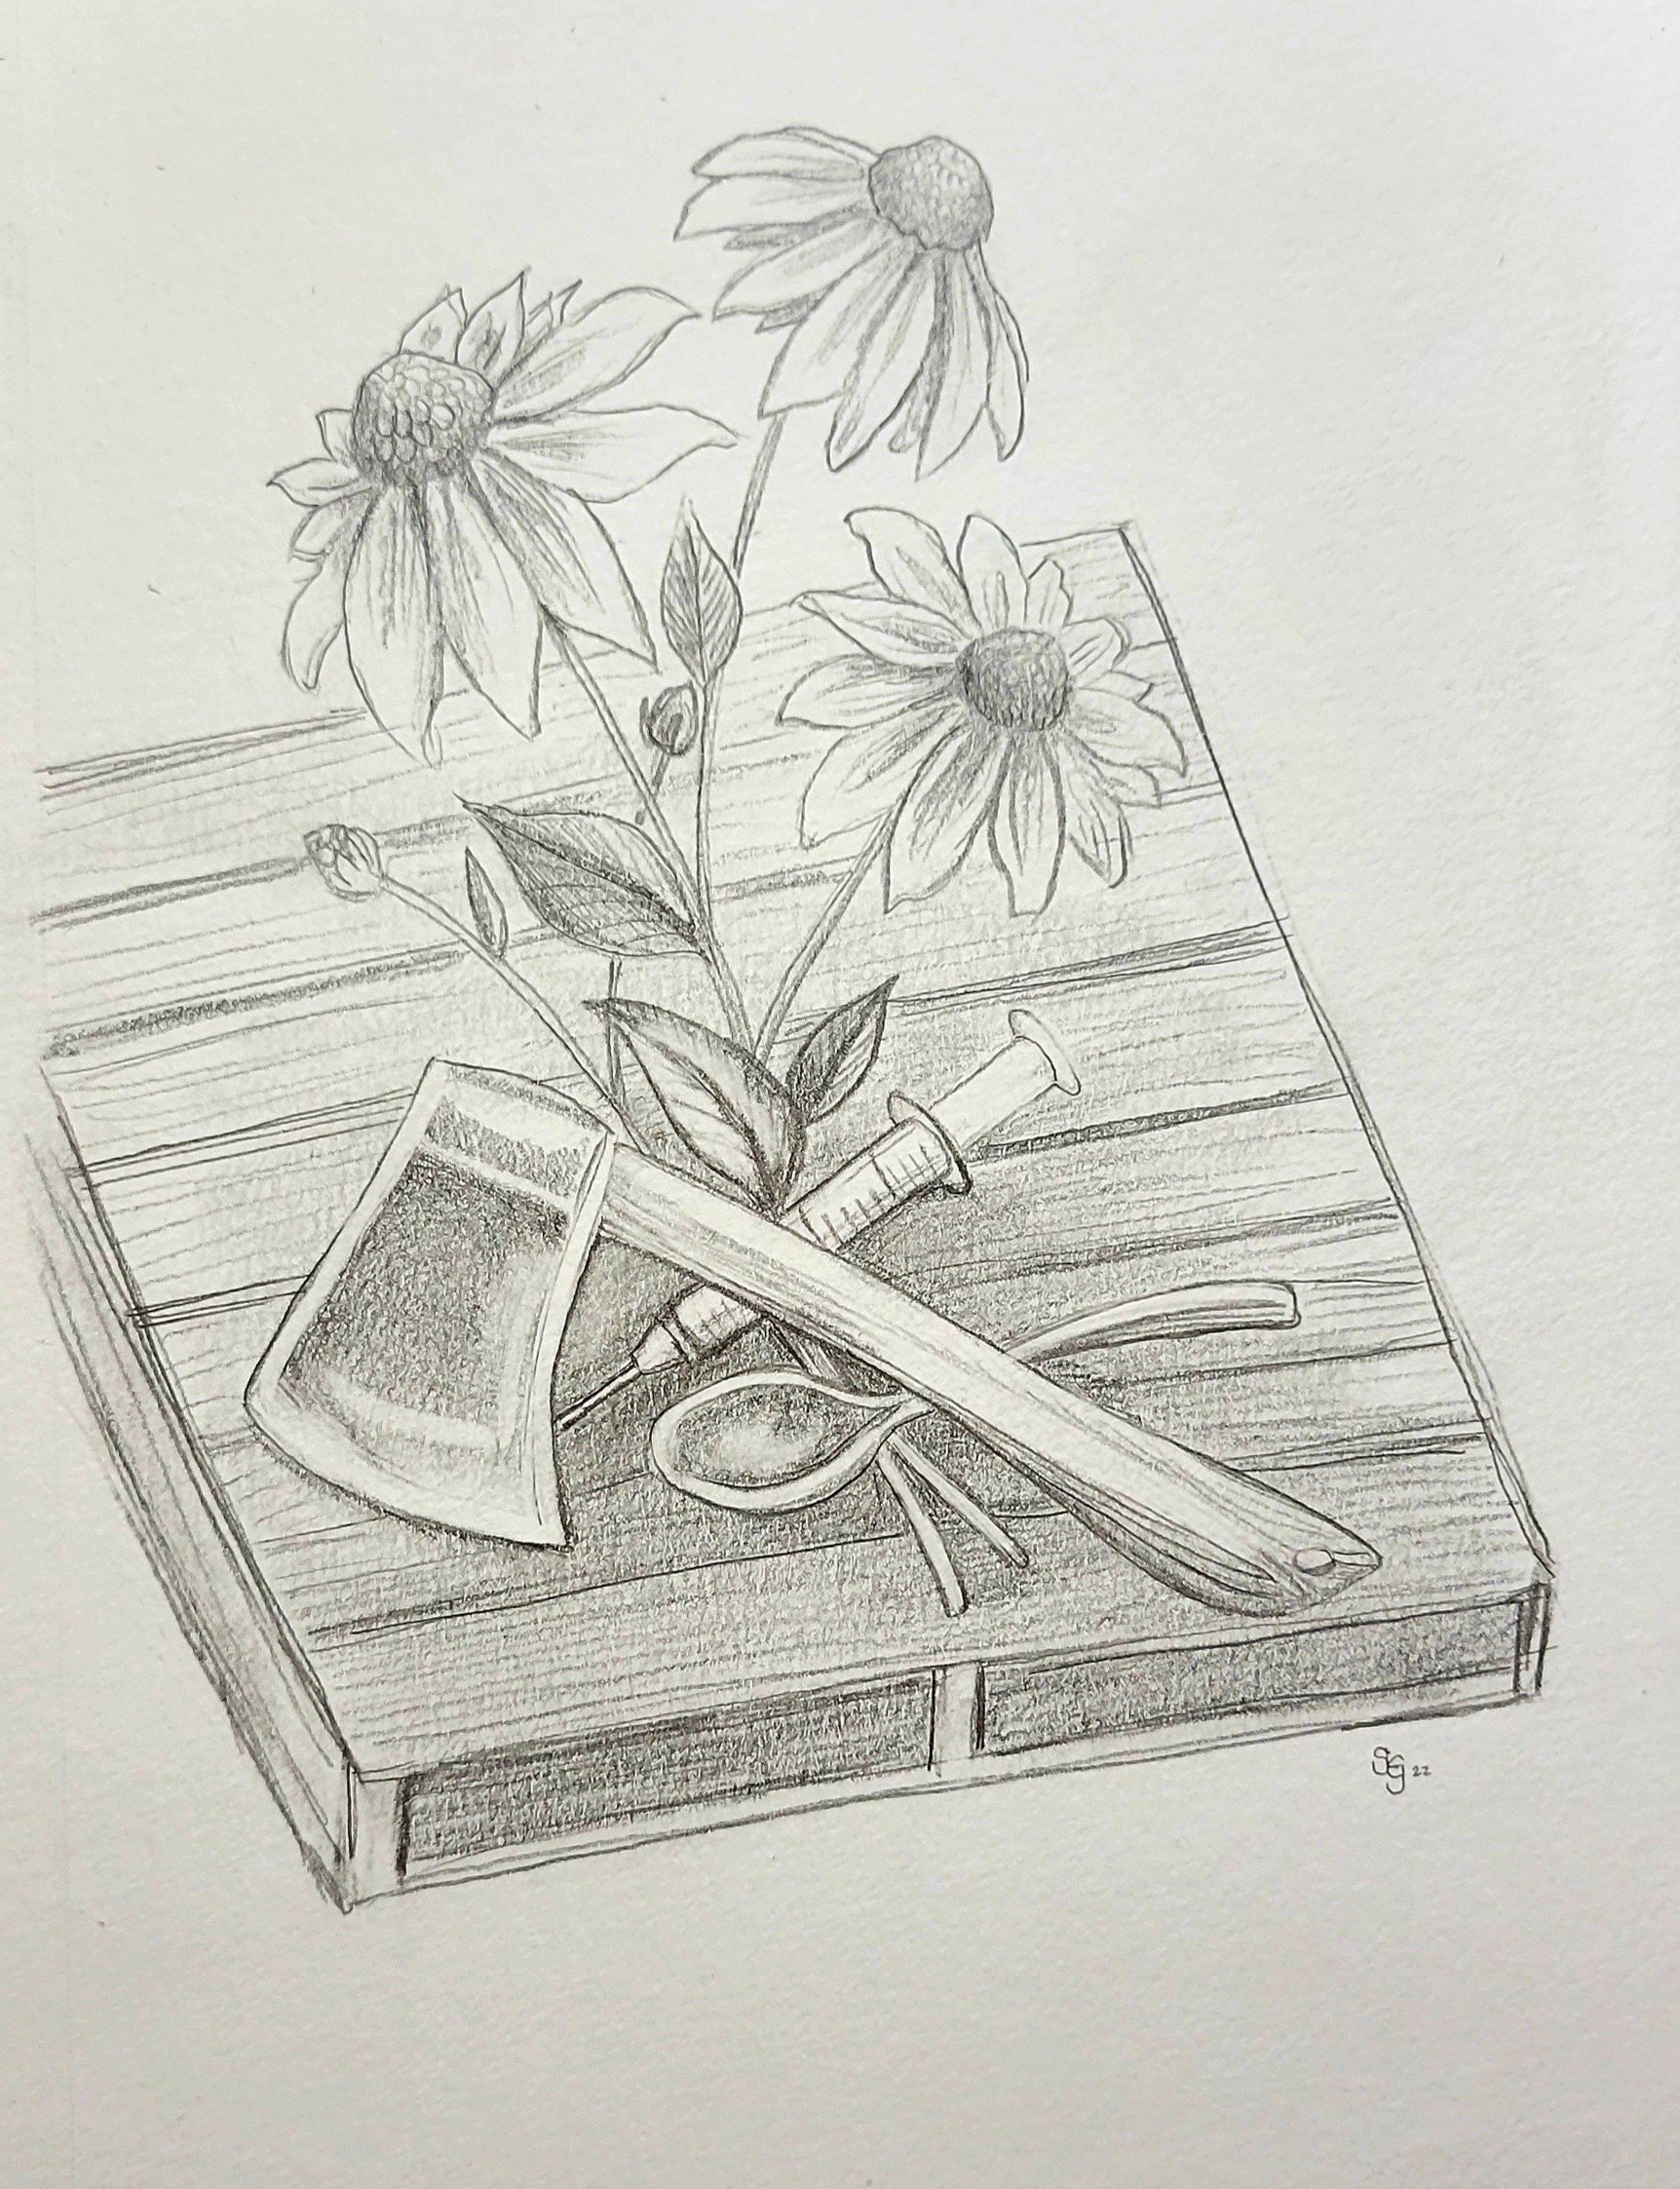 Sarah's episode doodle, ft. an axe, a pallet, and Black-Eyed Susans (the state flower of Maryland)